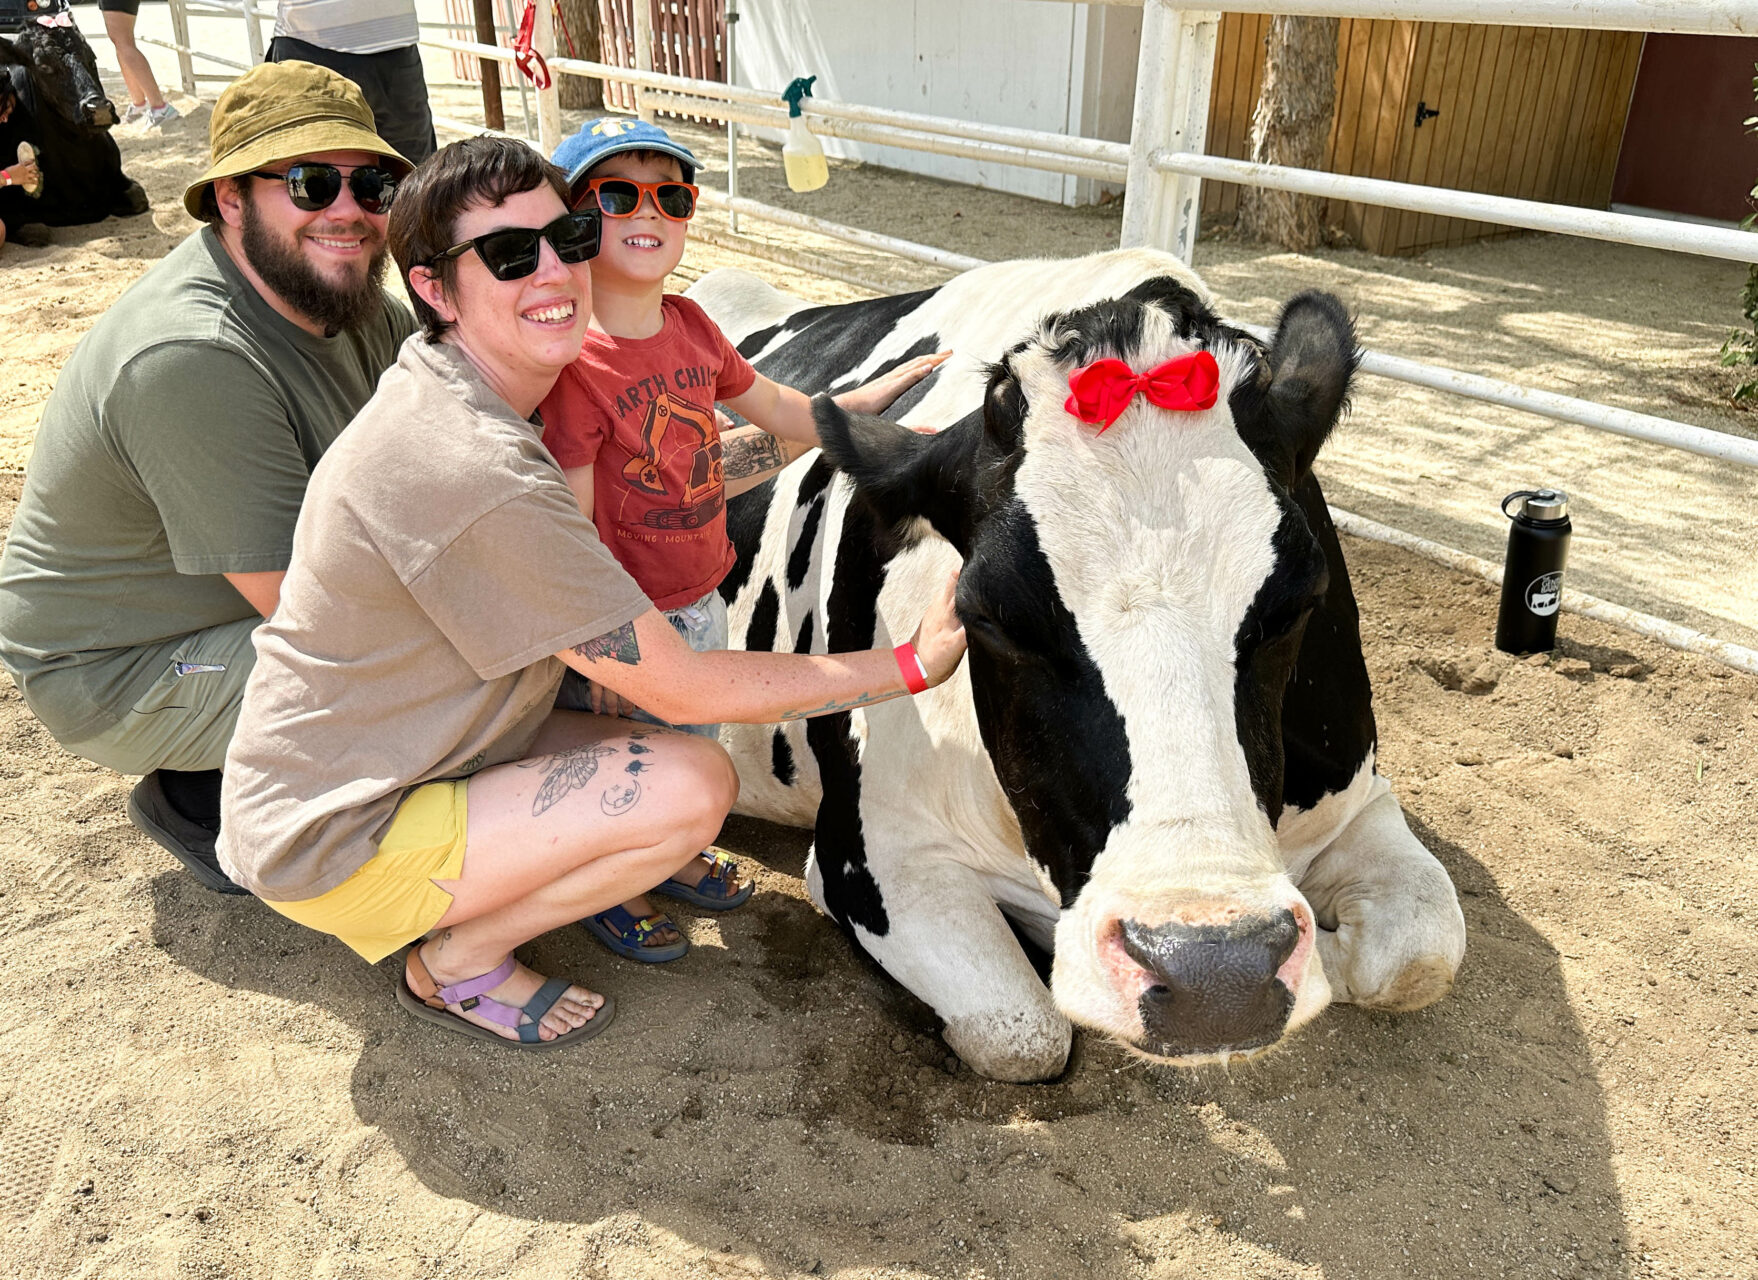 The whole family loves on the cows at the Gentle Barn in Santa Clarita, CA.